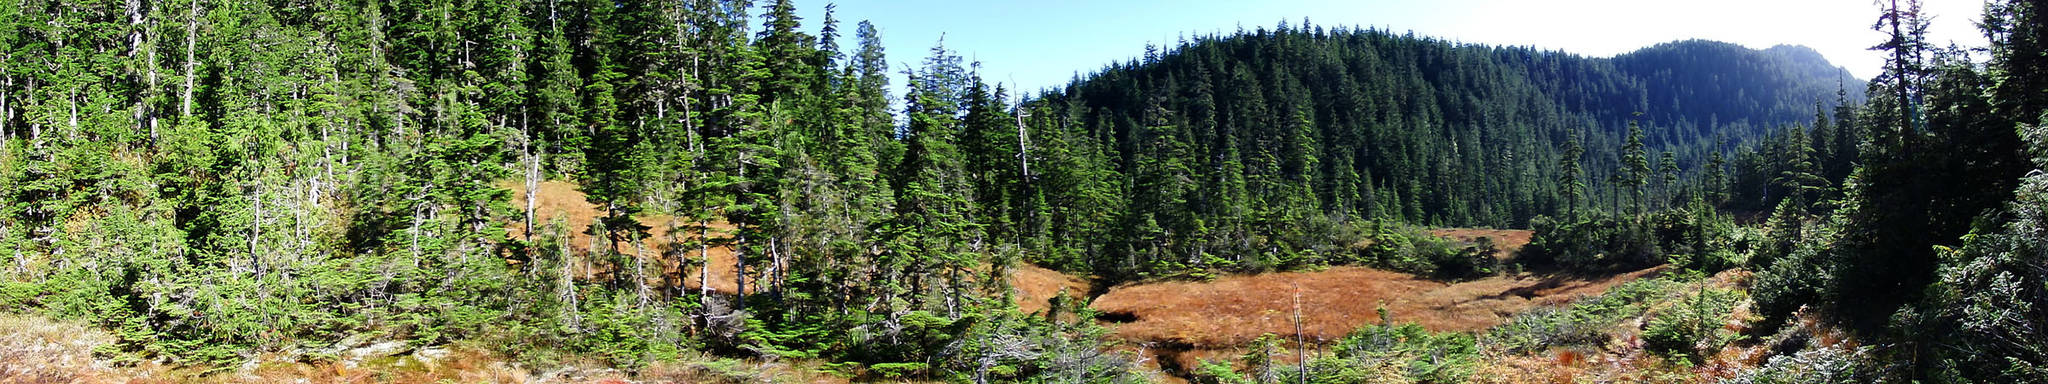 Panorama of a muskeg near the Mendenhall Glacier in early October. (Photo by Linda Shaw)